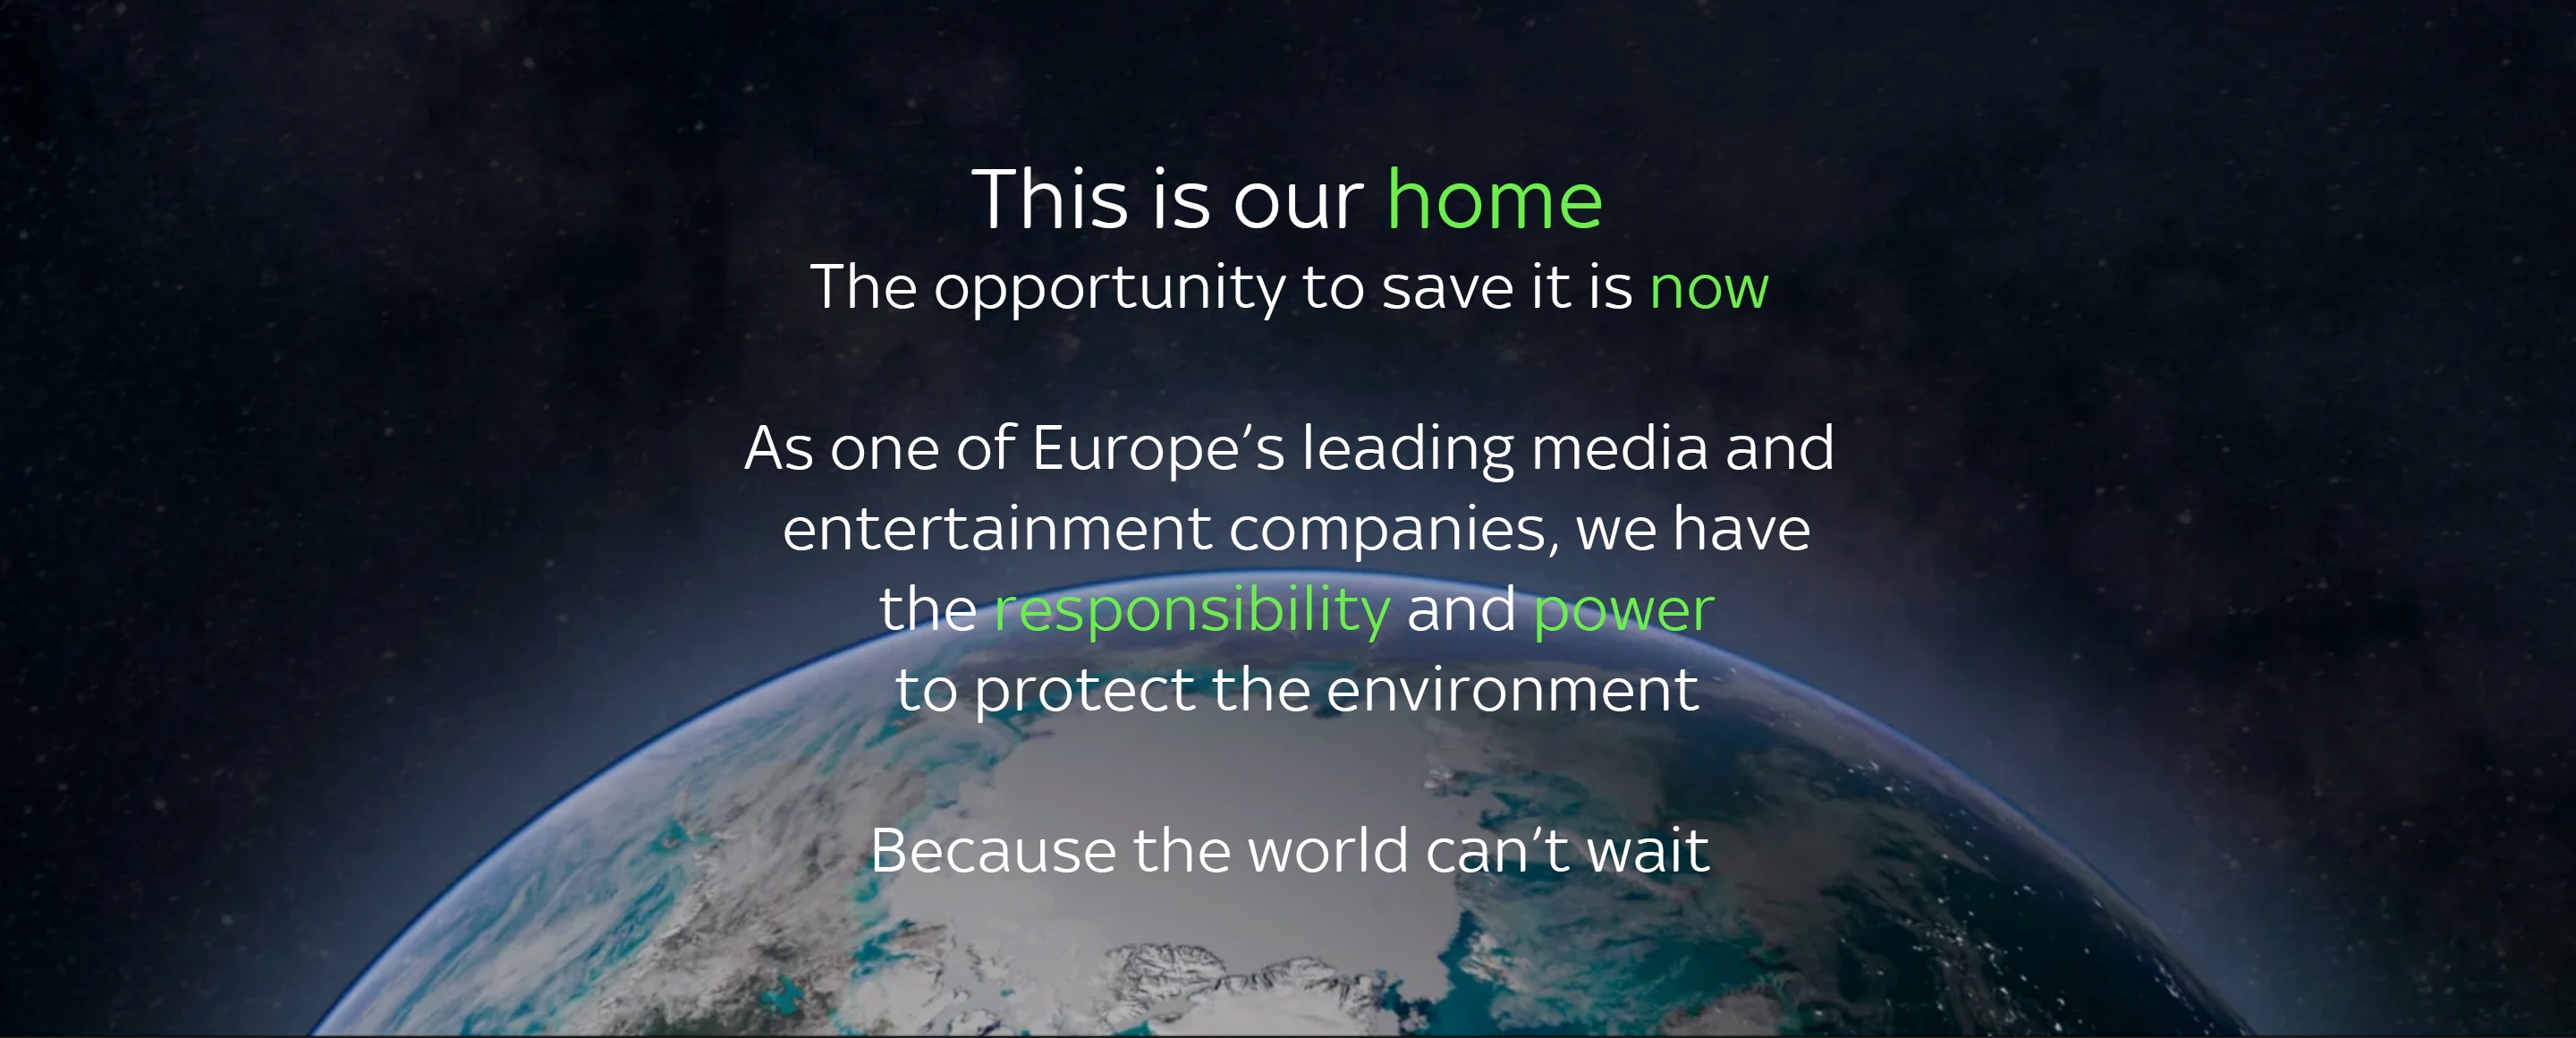 This is our home. The opportunity to save it is now. As one of Europe's leading media and entertainment companies we have the responsibility and power to protect the environment. Because the world can't wait.